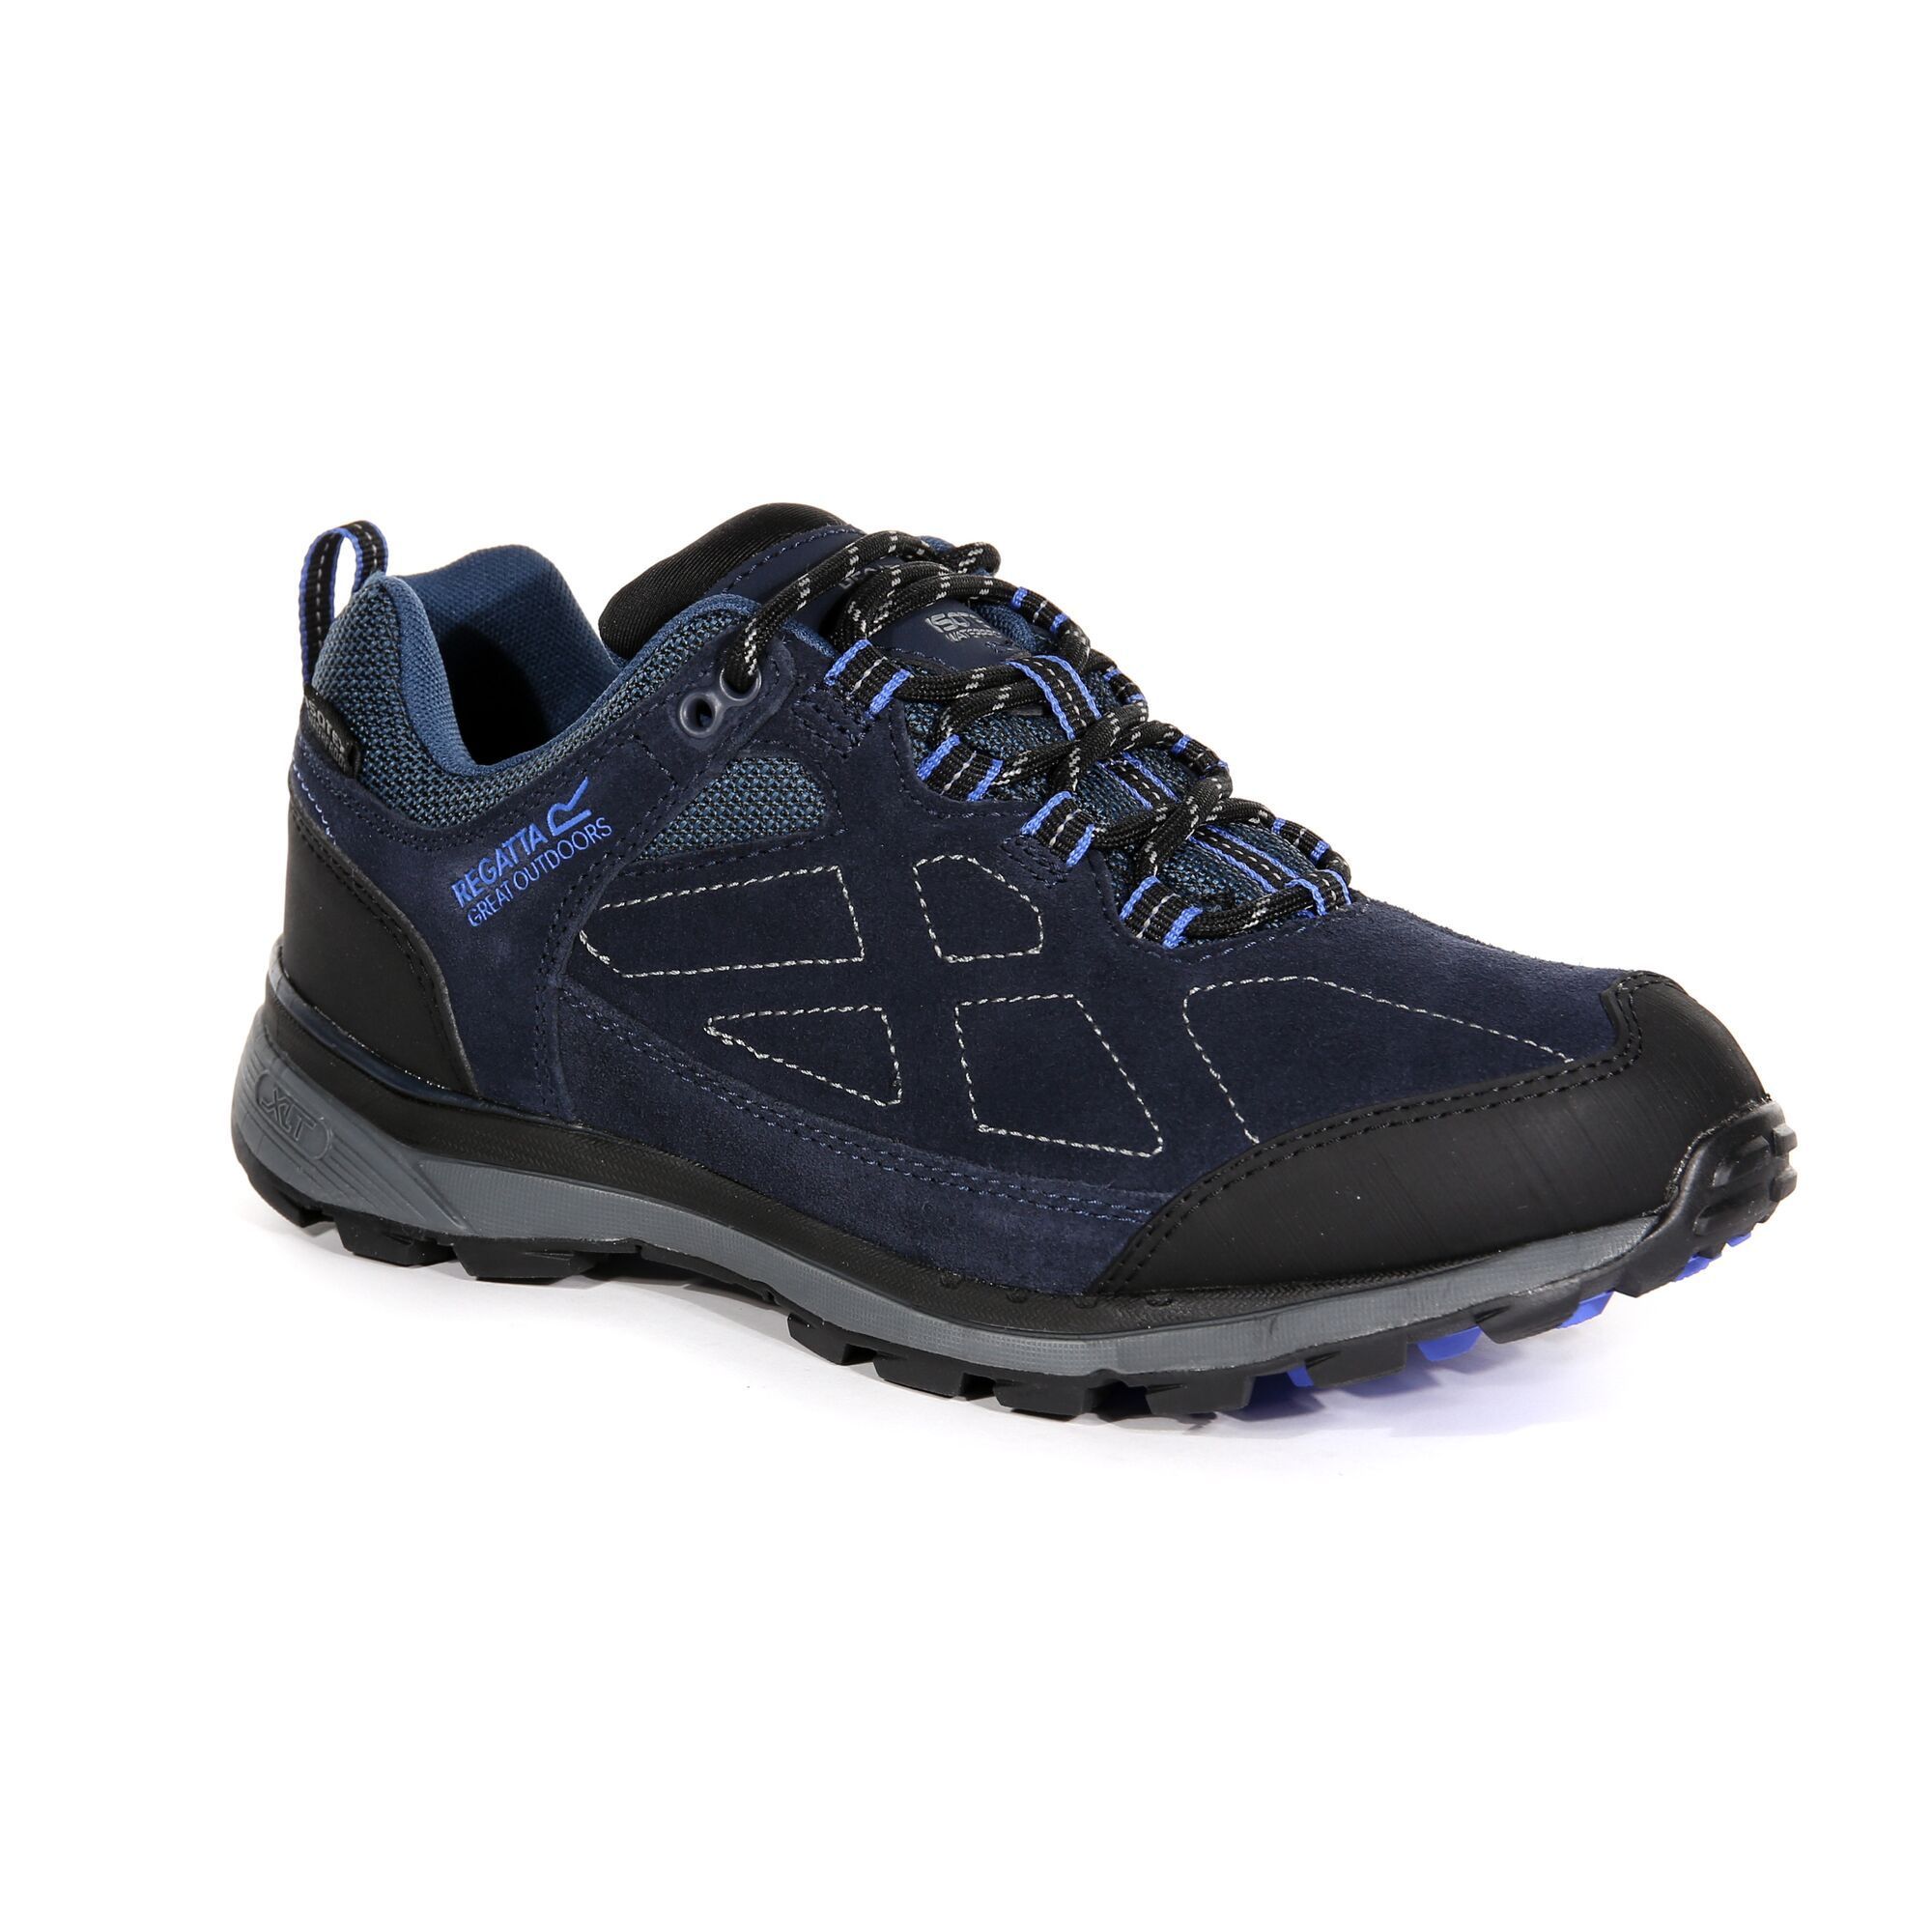 70% leather, 10% polyurathane, 10% polyester, 10% rubber. Waterproof, windproof and breathable Isotex. Hydropel water repellency. Lightweight moulded EVA midsole for cushioning. Ventilated mesh upper for breathability. Performance suede leather and mesh upper.